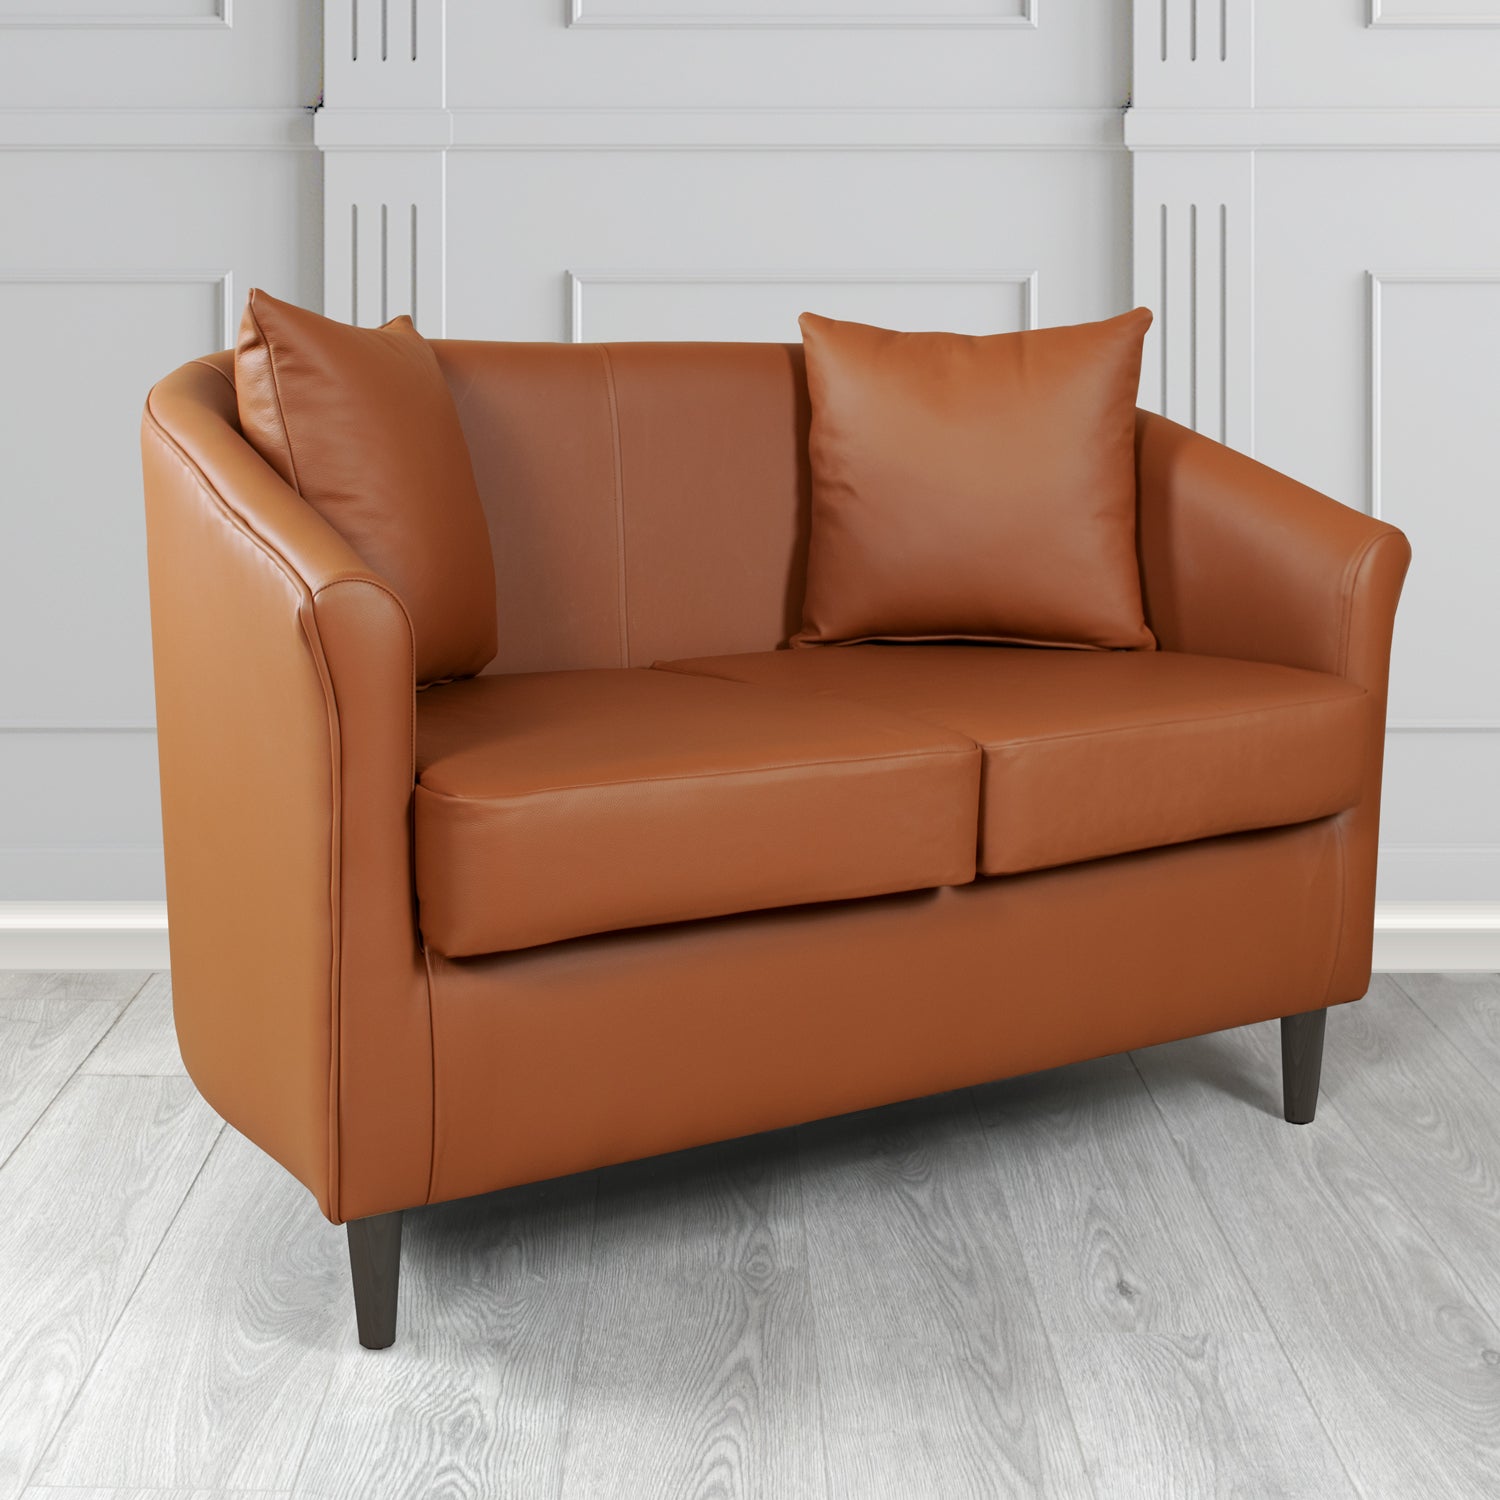 St Tropez Shelly Castagna Crib 5 Genuine Leather 2 Seater Tub Sofa with Scatter Cushions - The Tub Chair Shop